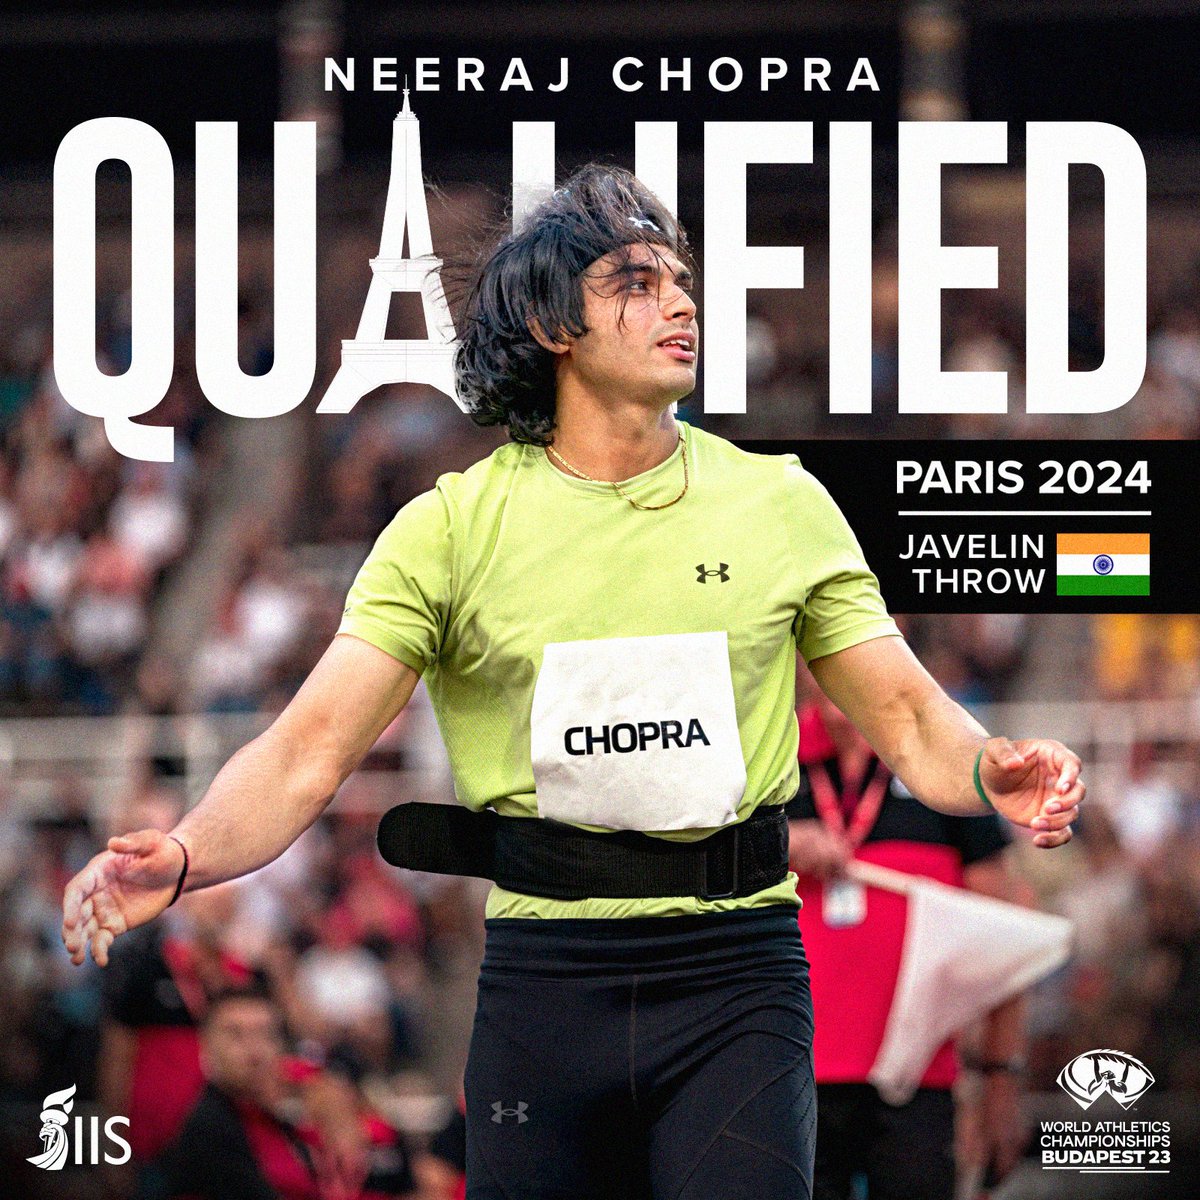 TICKETS BOOKED! 🇮🇳📷 #NeerajChopra's effort of 88.77m at #WACBudapest2023 is well beyond the #Paris2024 qualification mark of 85.50m. 📷#CraftingVictories #Javelin